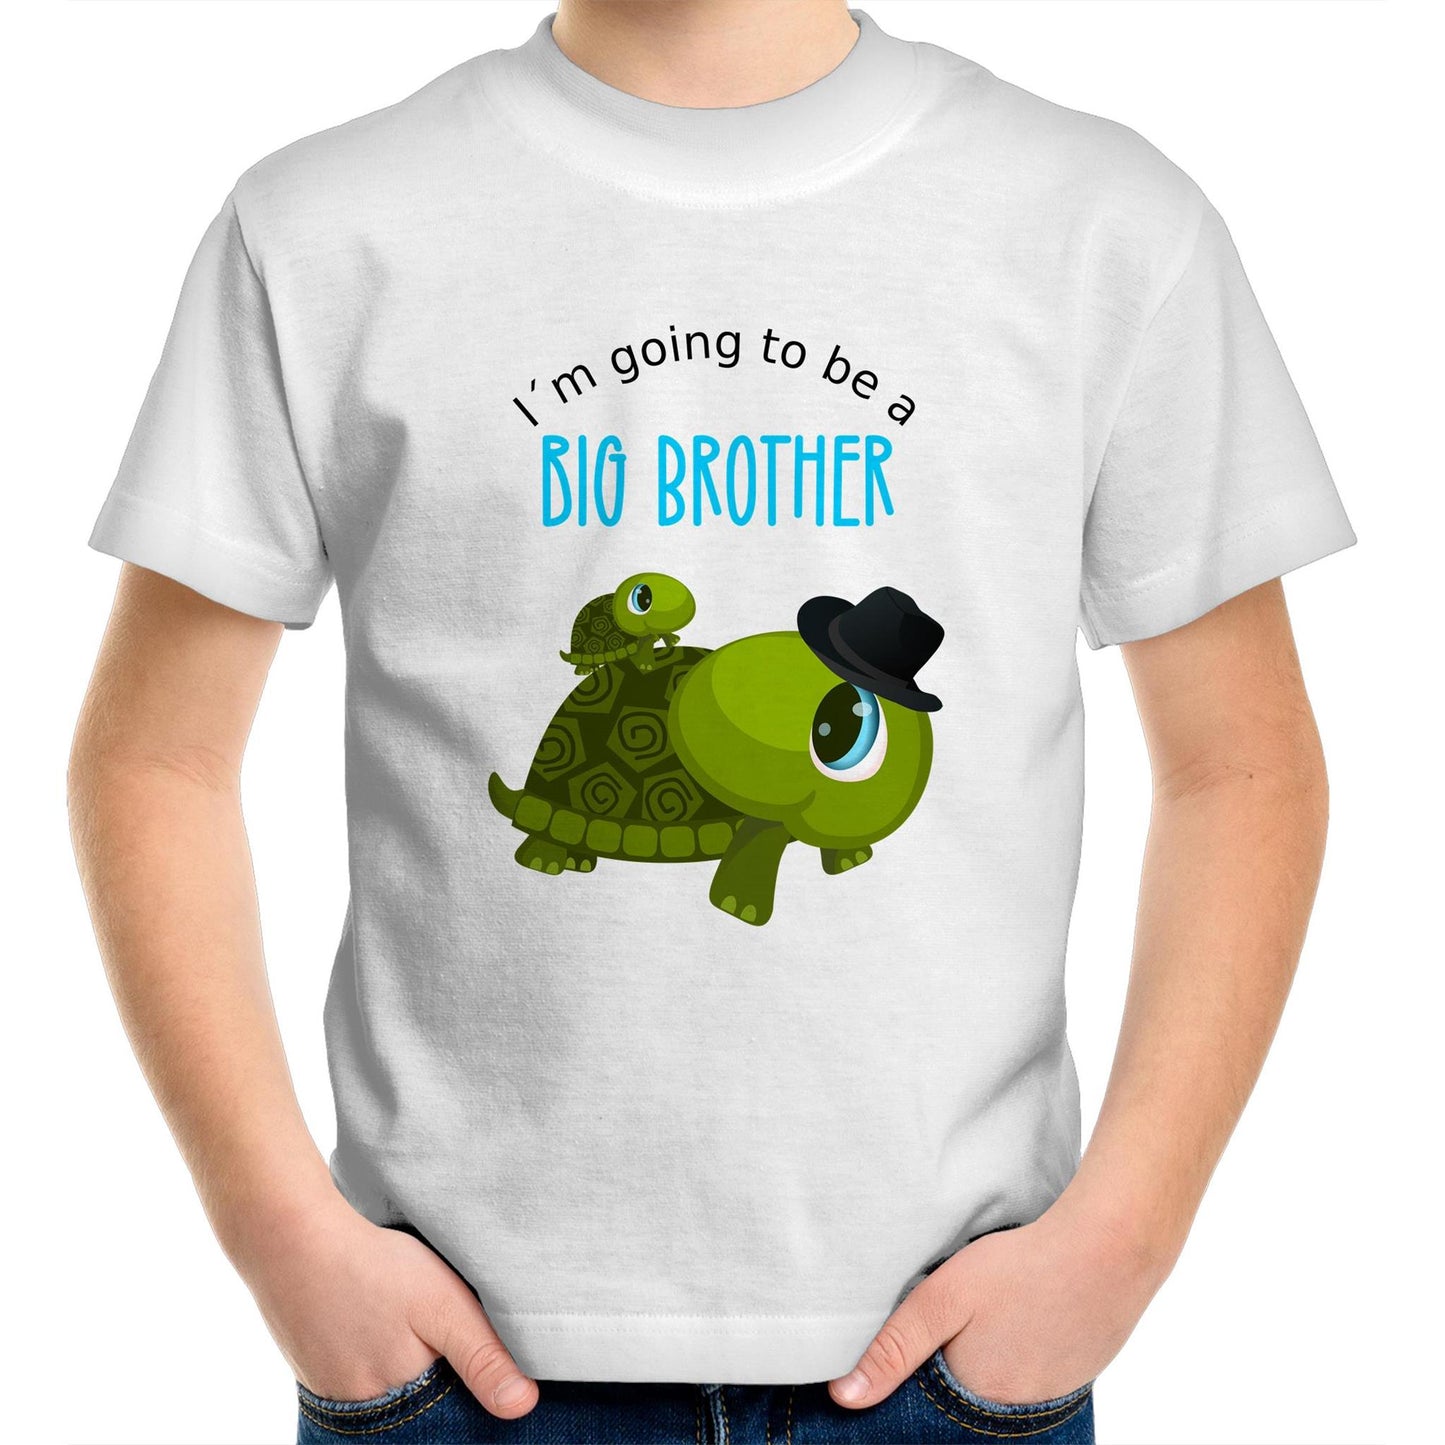 I'm going to be a big brother with Turtle T shirt